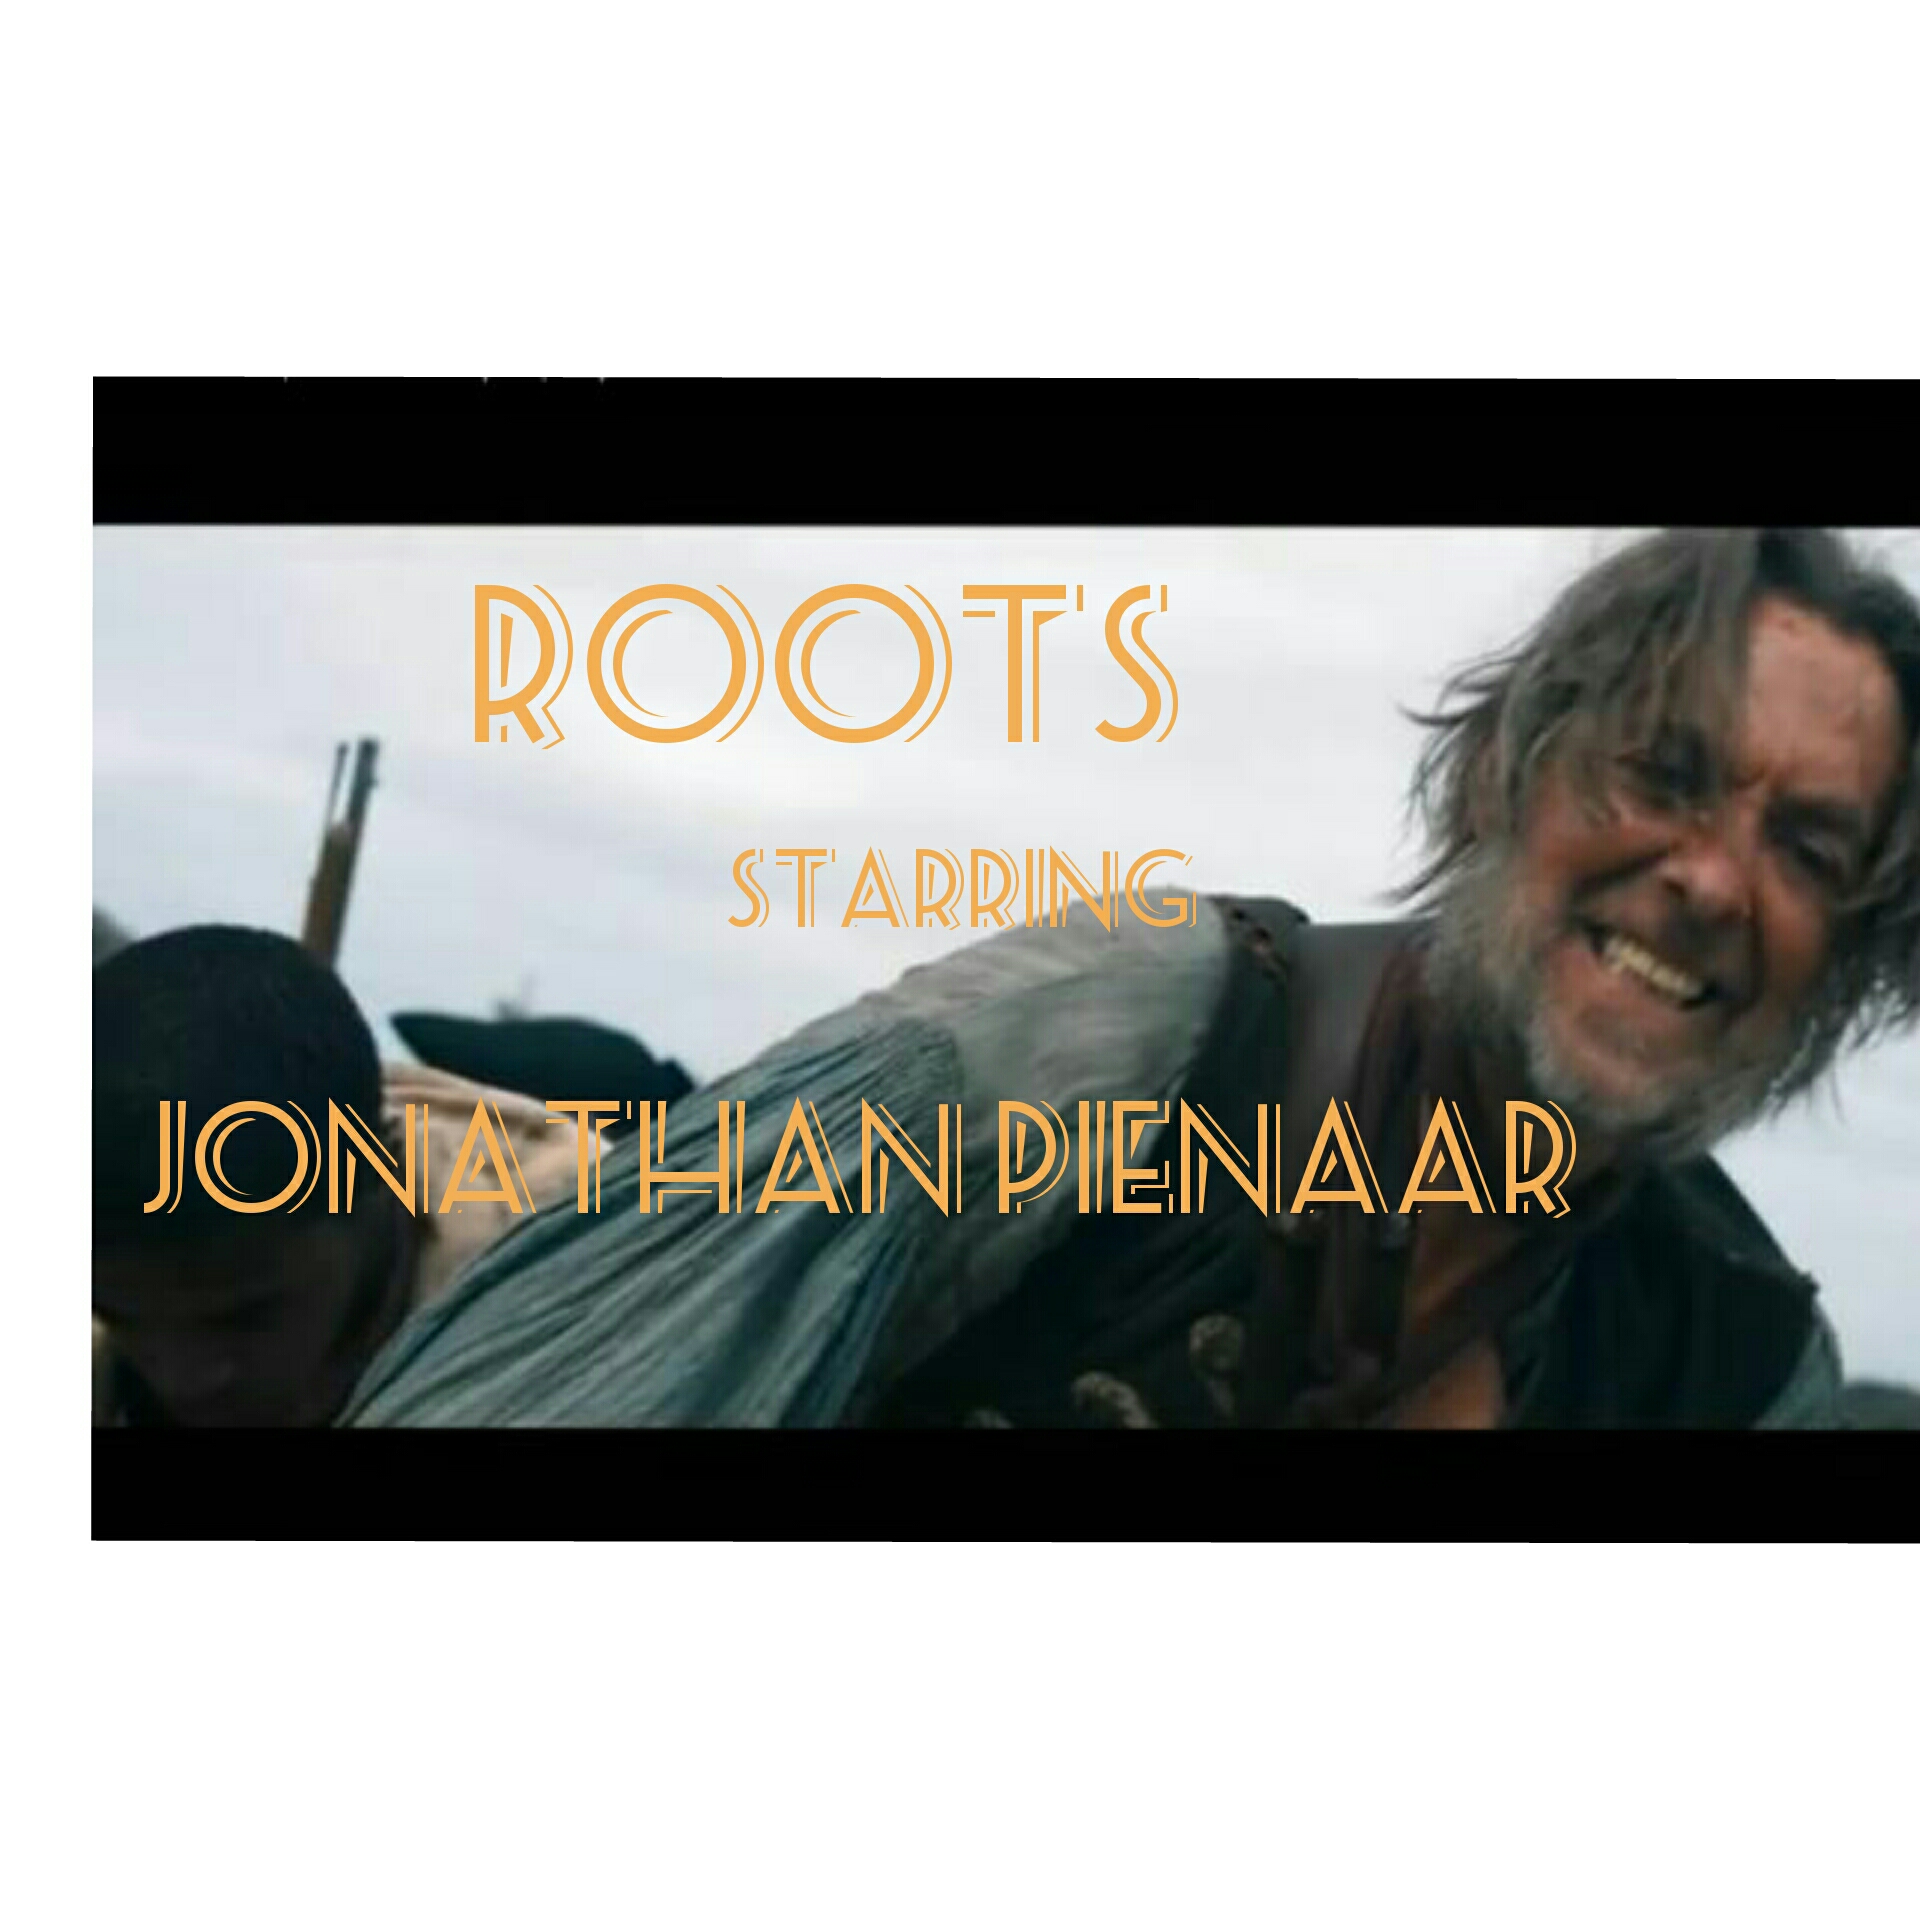 Piennar for “Roots”